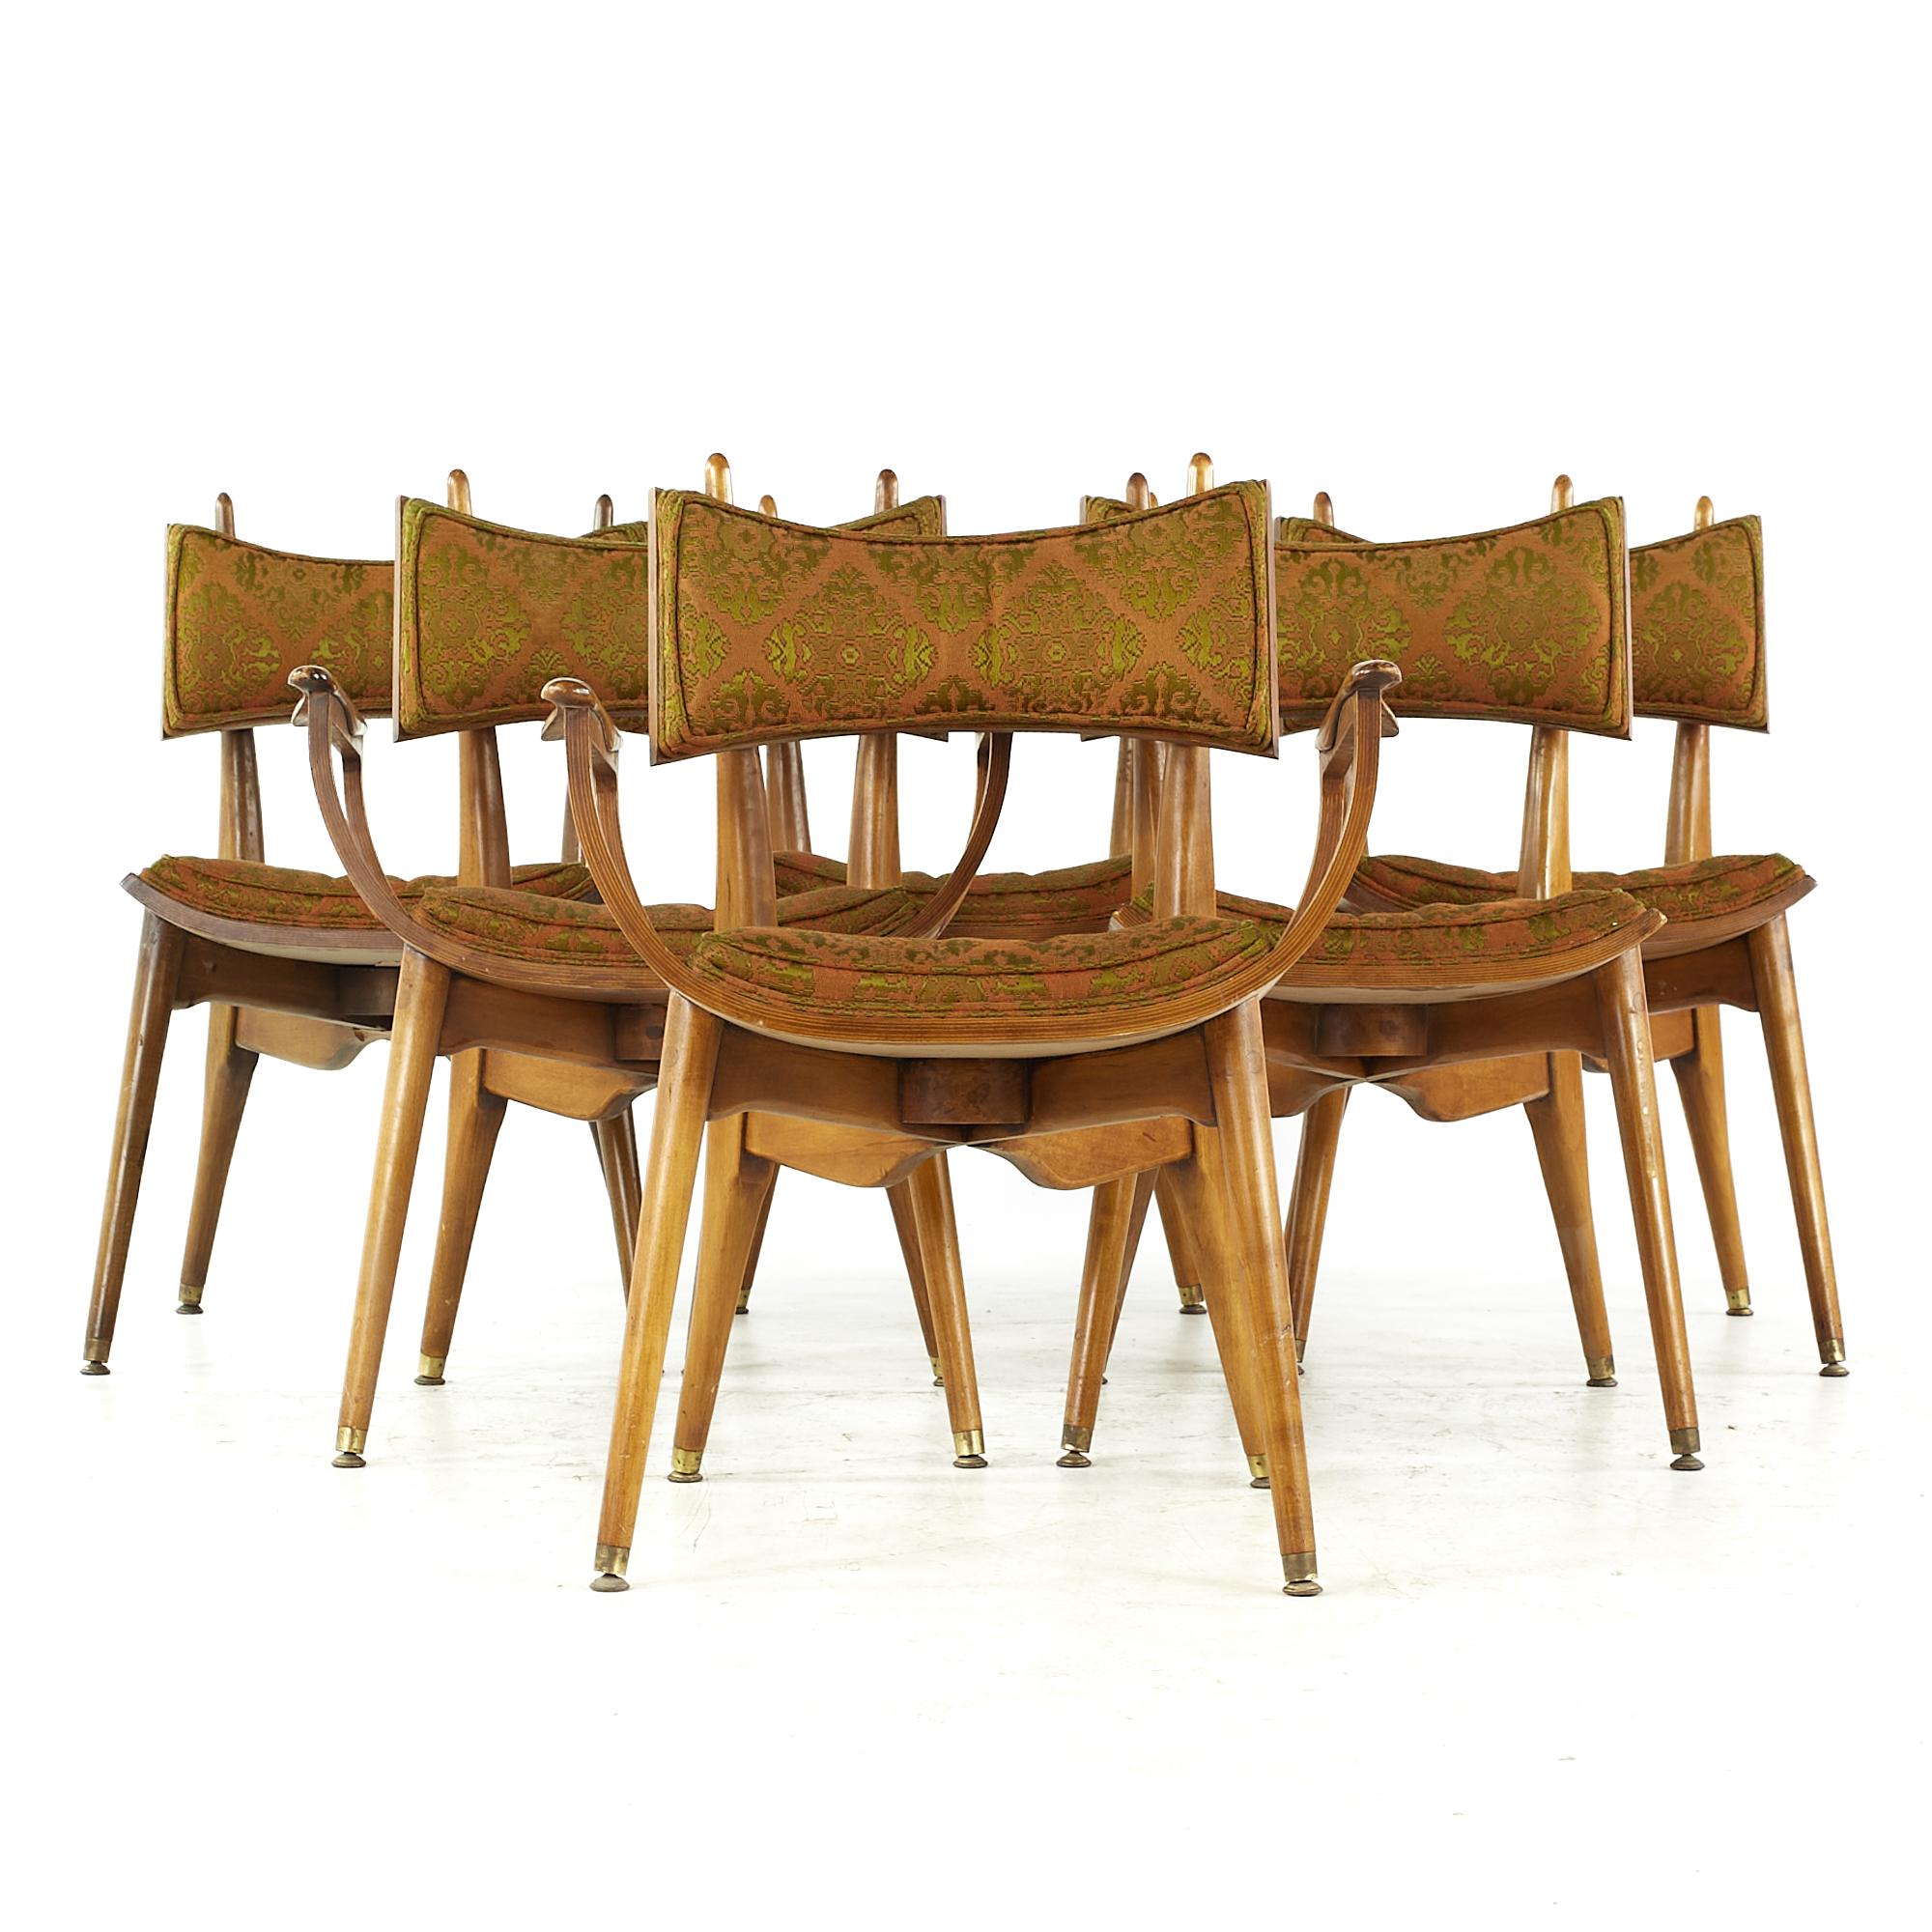 Harold Schwartz for Romweber midcentury Burlwood dining chairs - Set of 6

Each armless chair measures: 19.25 wide x 24 deep x 32.5 high, with a seat height of 18.5 inches
Each captains chair measures: 25.5 wide x x 24 deep x 32.5 high, with a